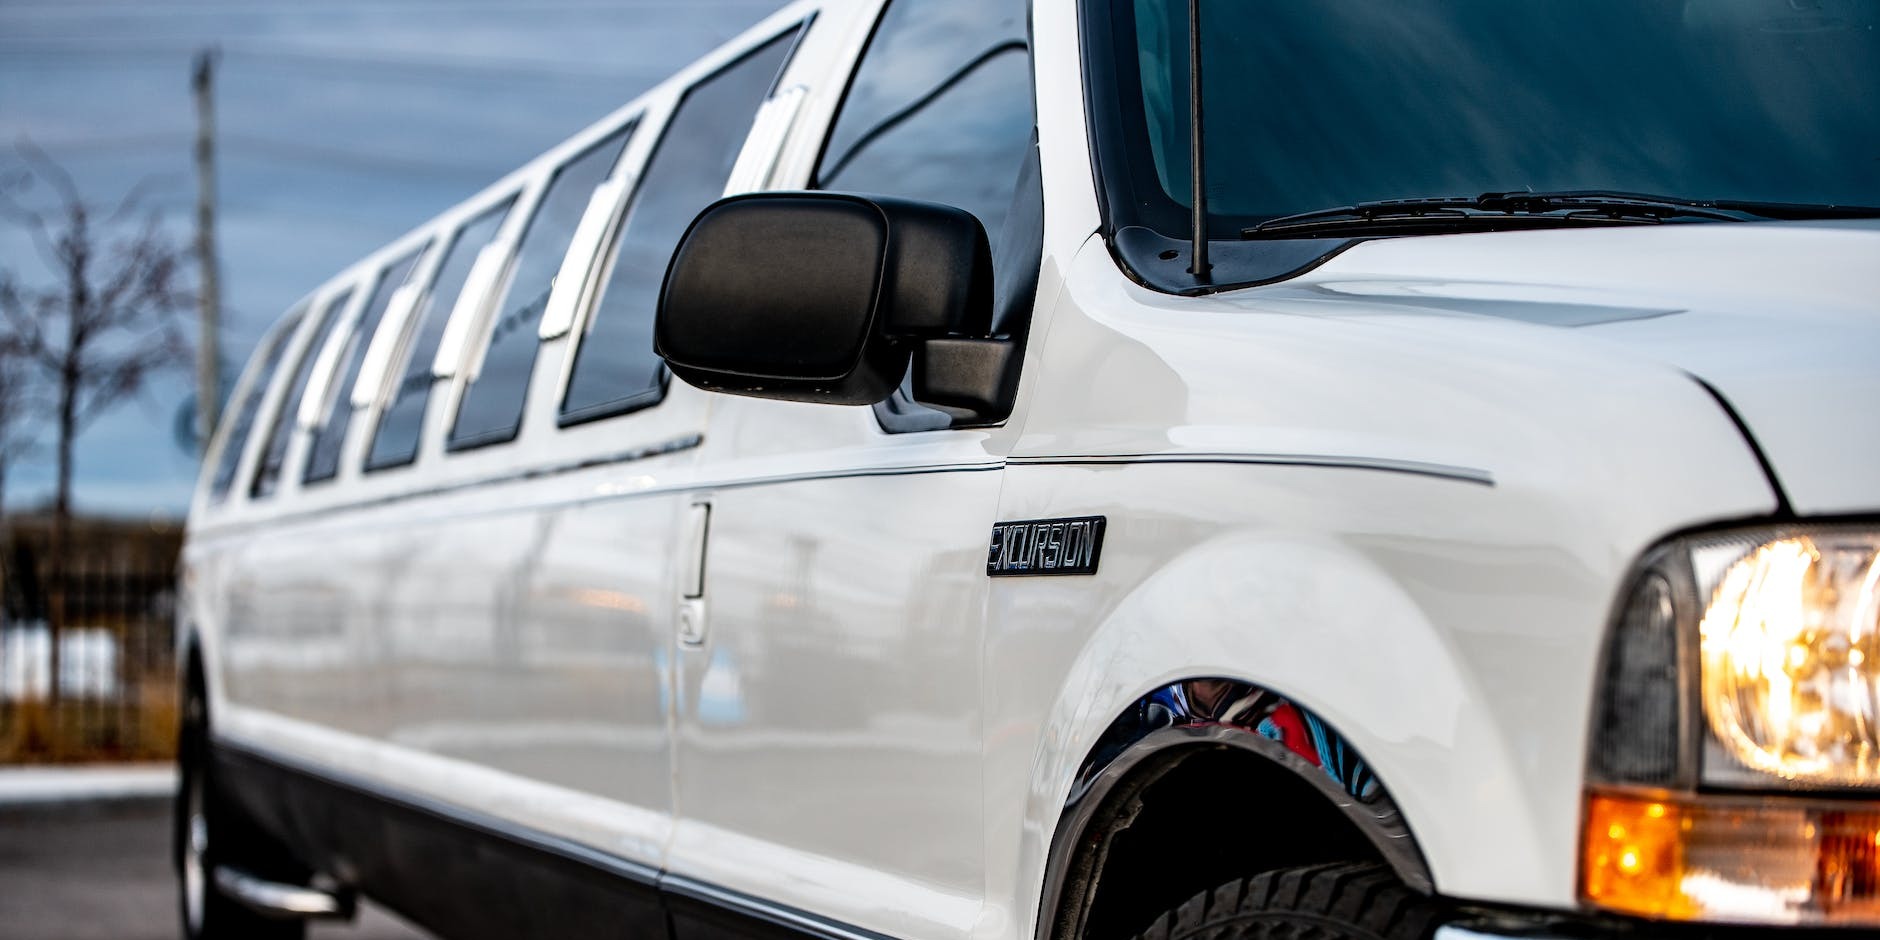 How to Find the Best Limo Hire Deals in Prettlewell without Overpaying